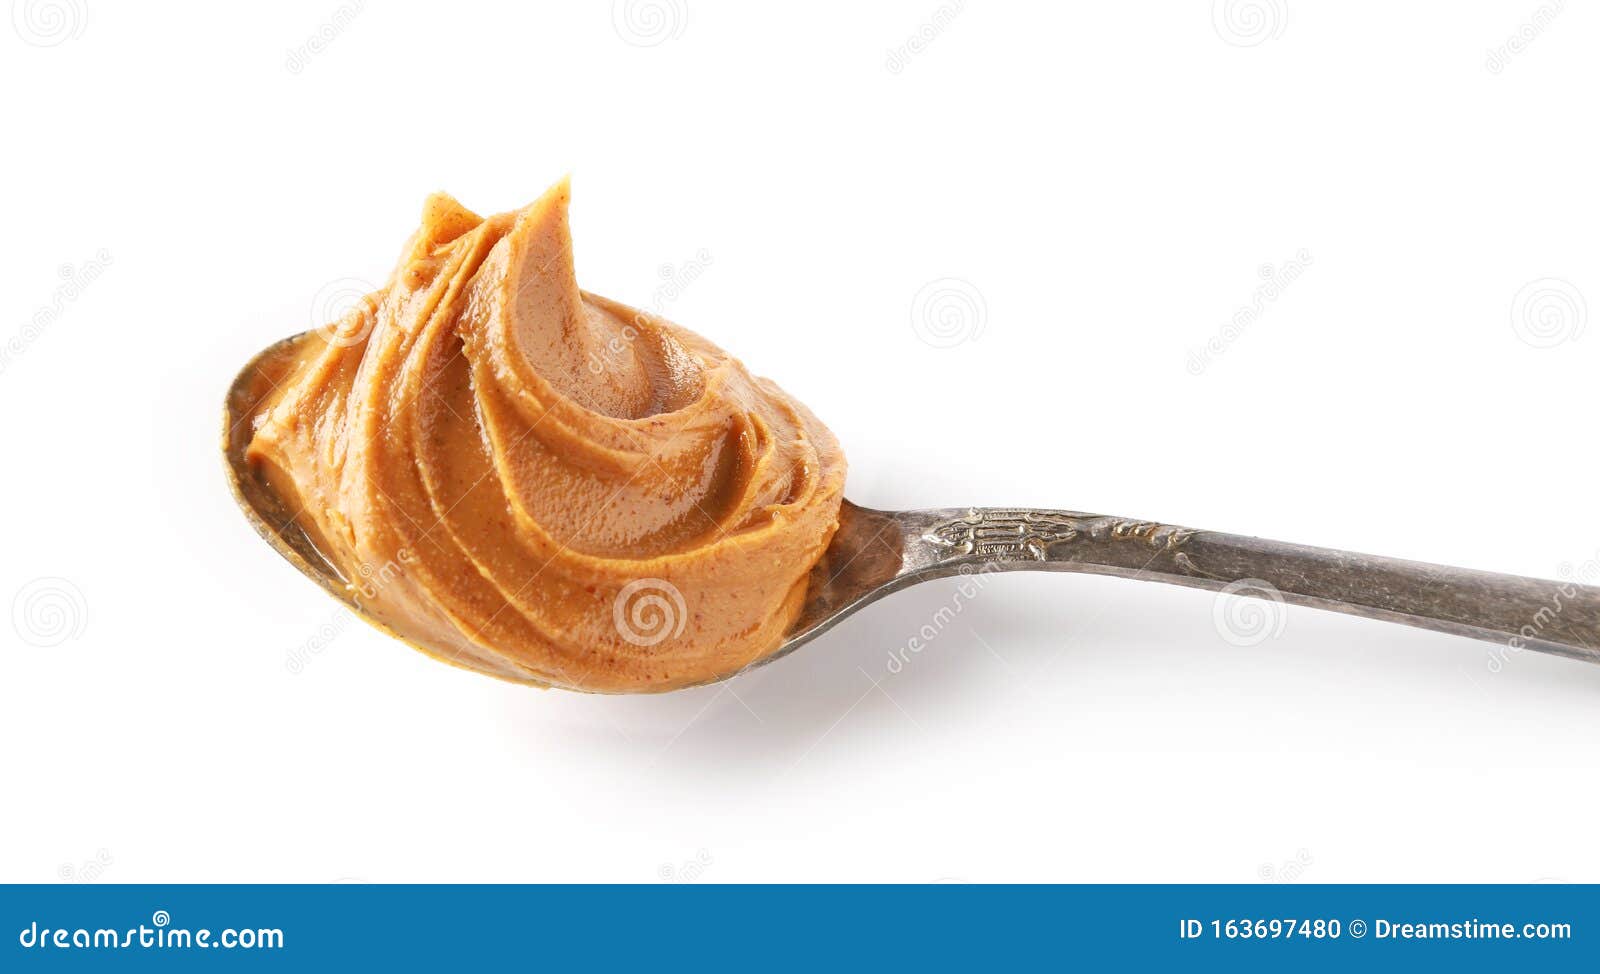 https://thumbs.dreamstime.com/z/spoon-peanut-butter-isolated-white-background-163697480.jpg